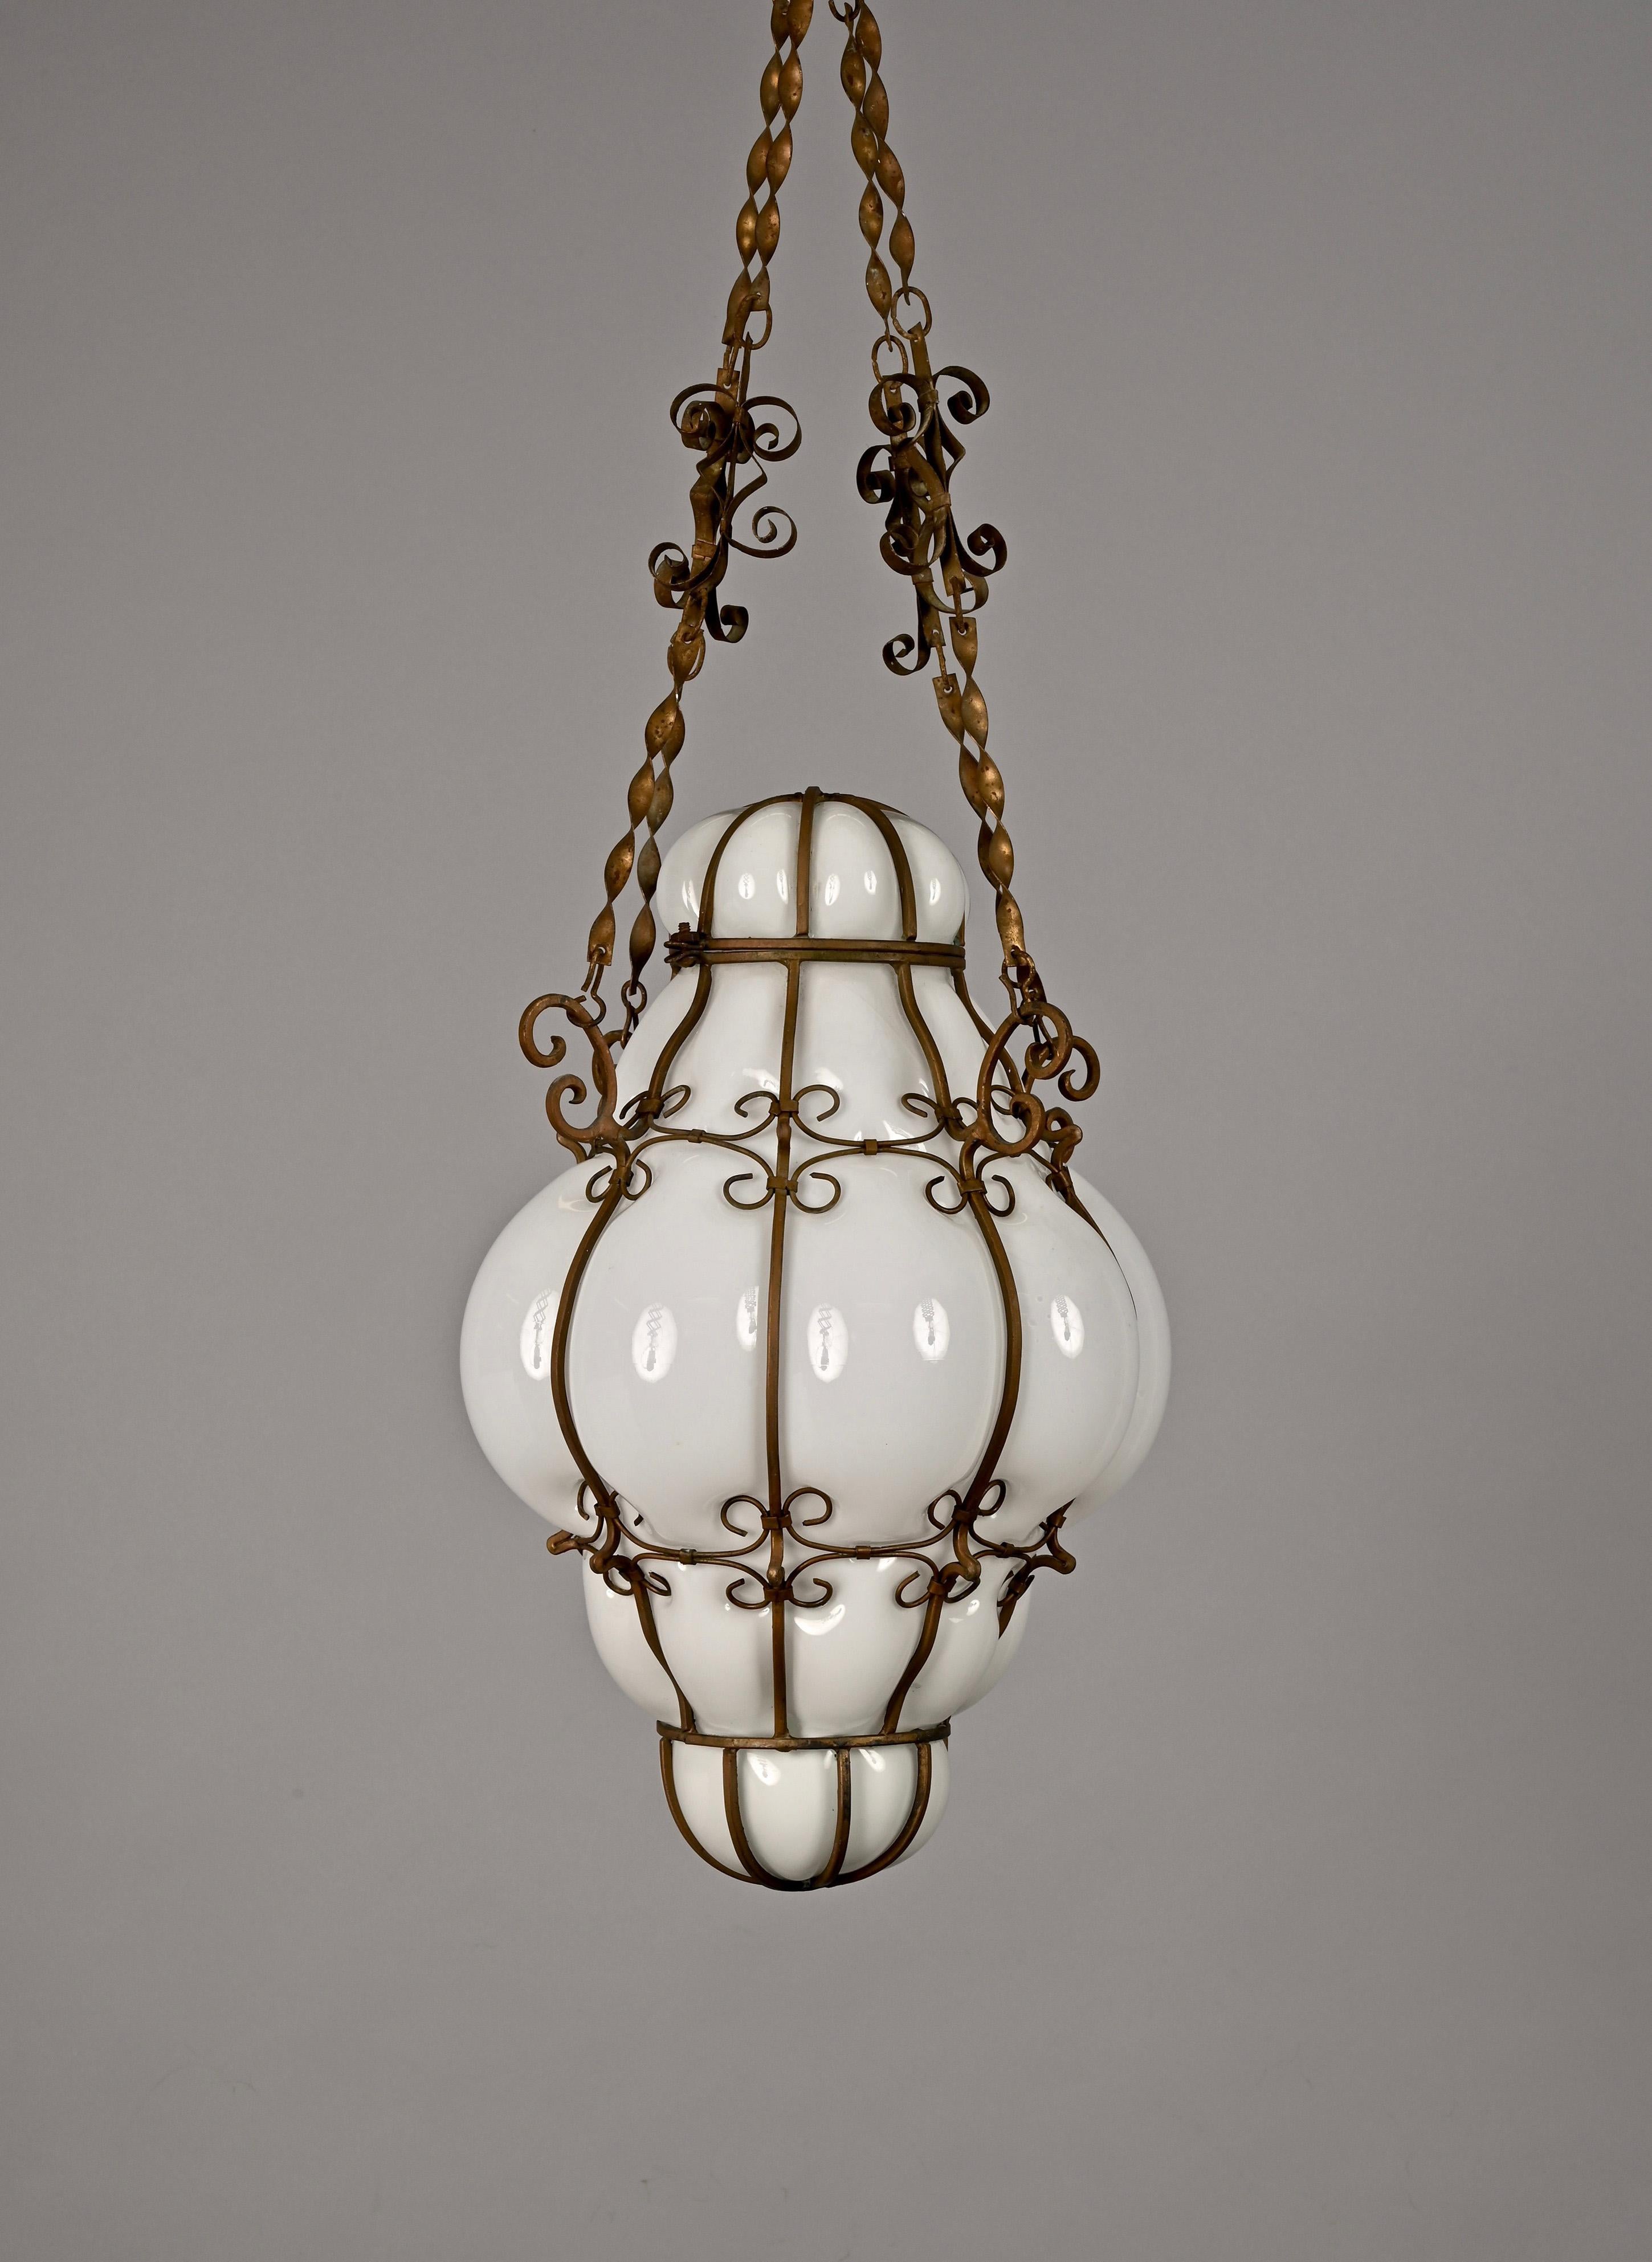 Midcentury Venetian Brass and Mouth Blown Murano White Glass Chandelier, 1940s For Sale 8